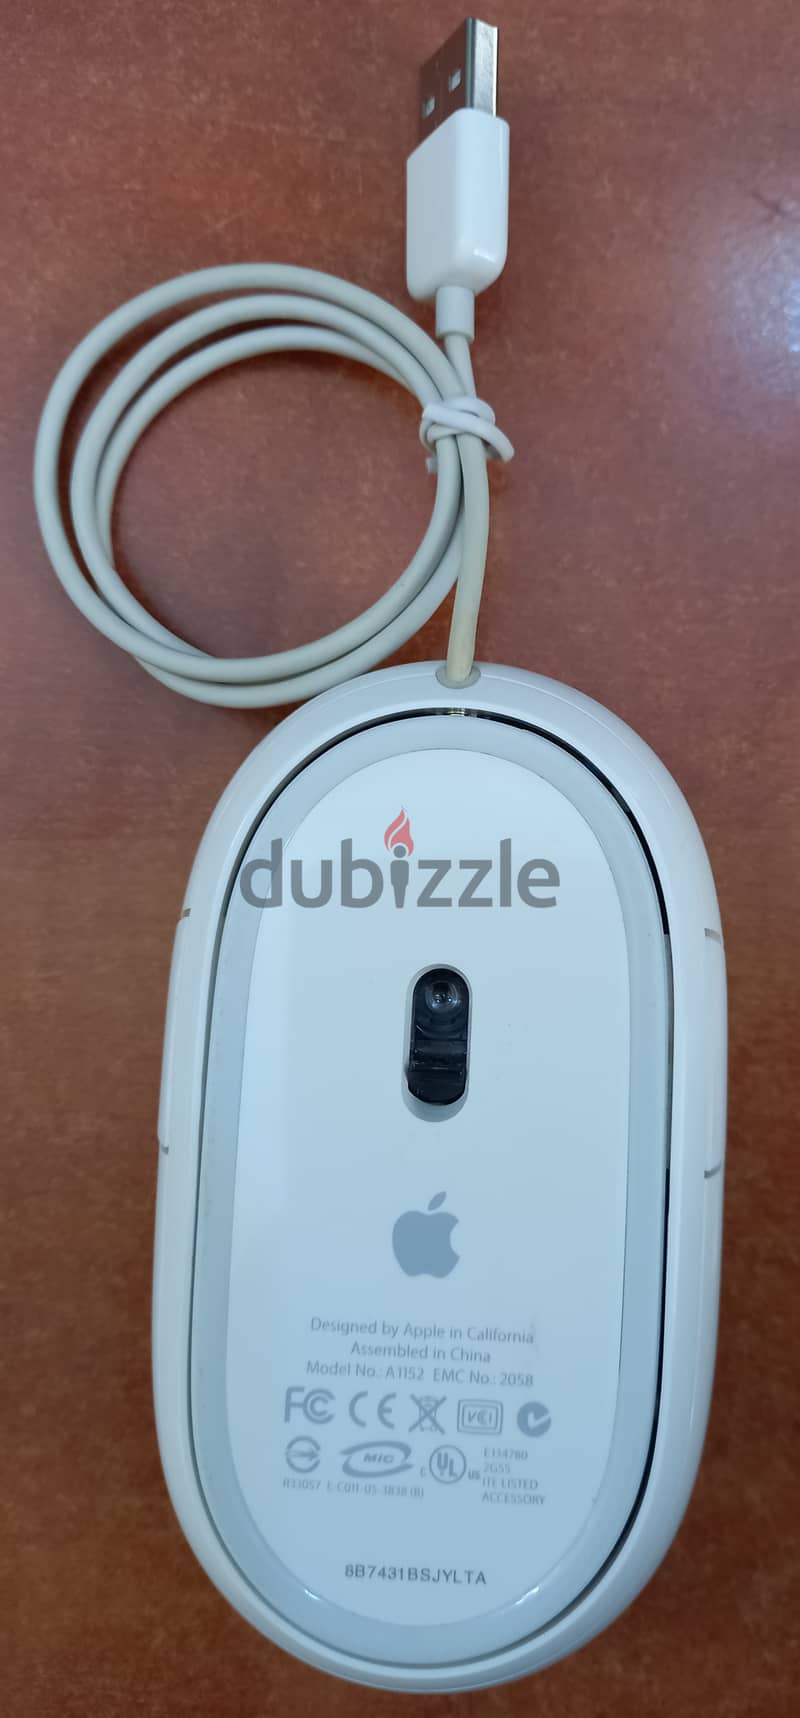 Apple mouse 1